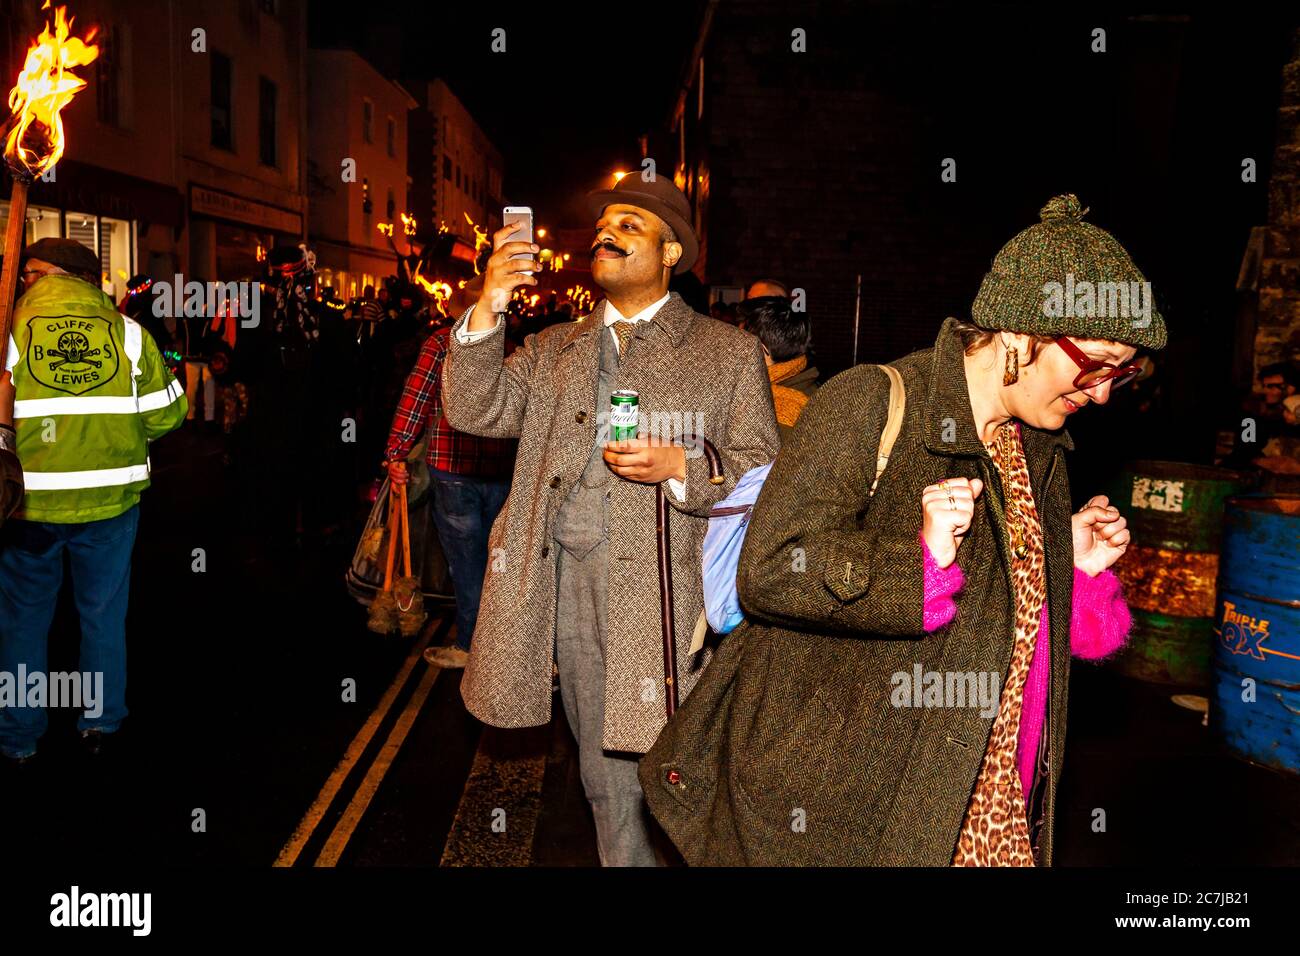 Visitors Watch The Bonfire Night (Guy Fawkes Night) Celebrations, Lewes, East Sussex, UK Stock Photo